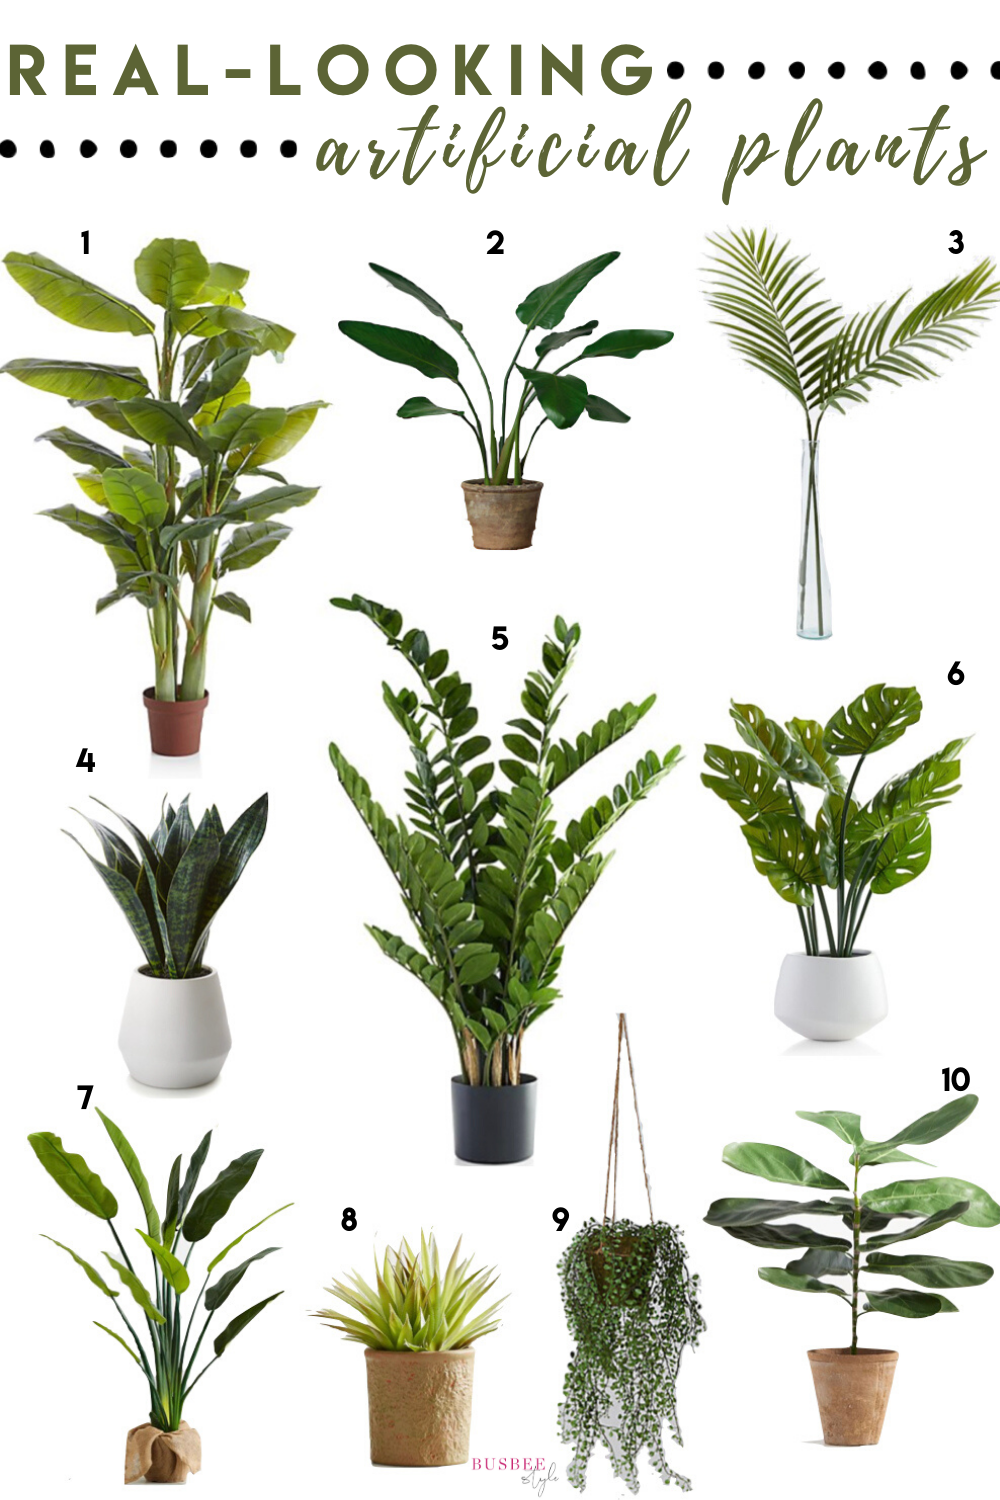 How To Find The Most Real Looking Artificial Plants | Faux Indoor Plants